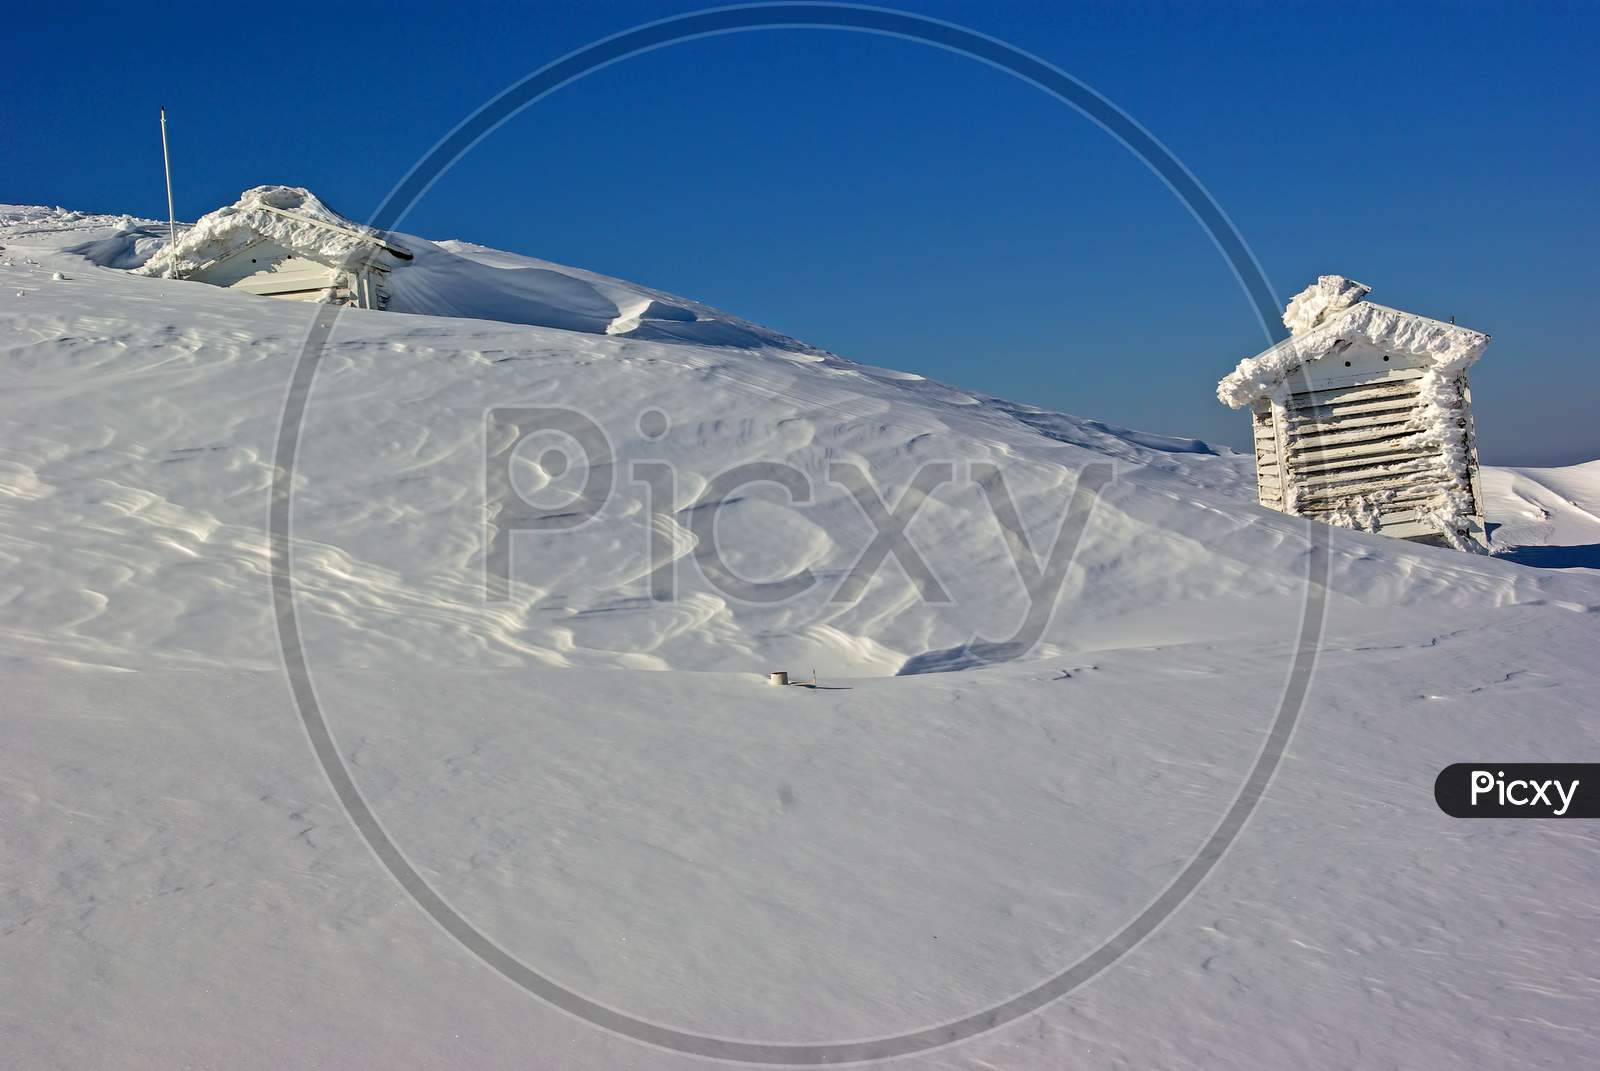 Snow Covered Weather Station On Mountain Top